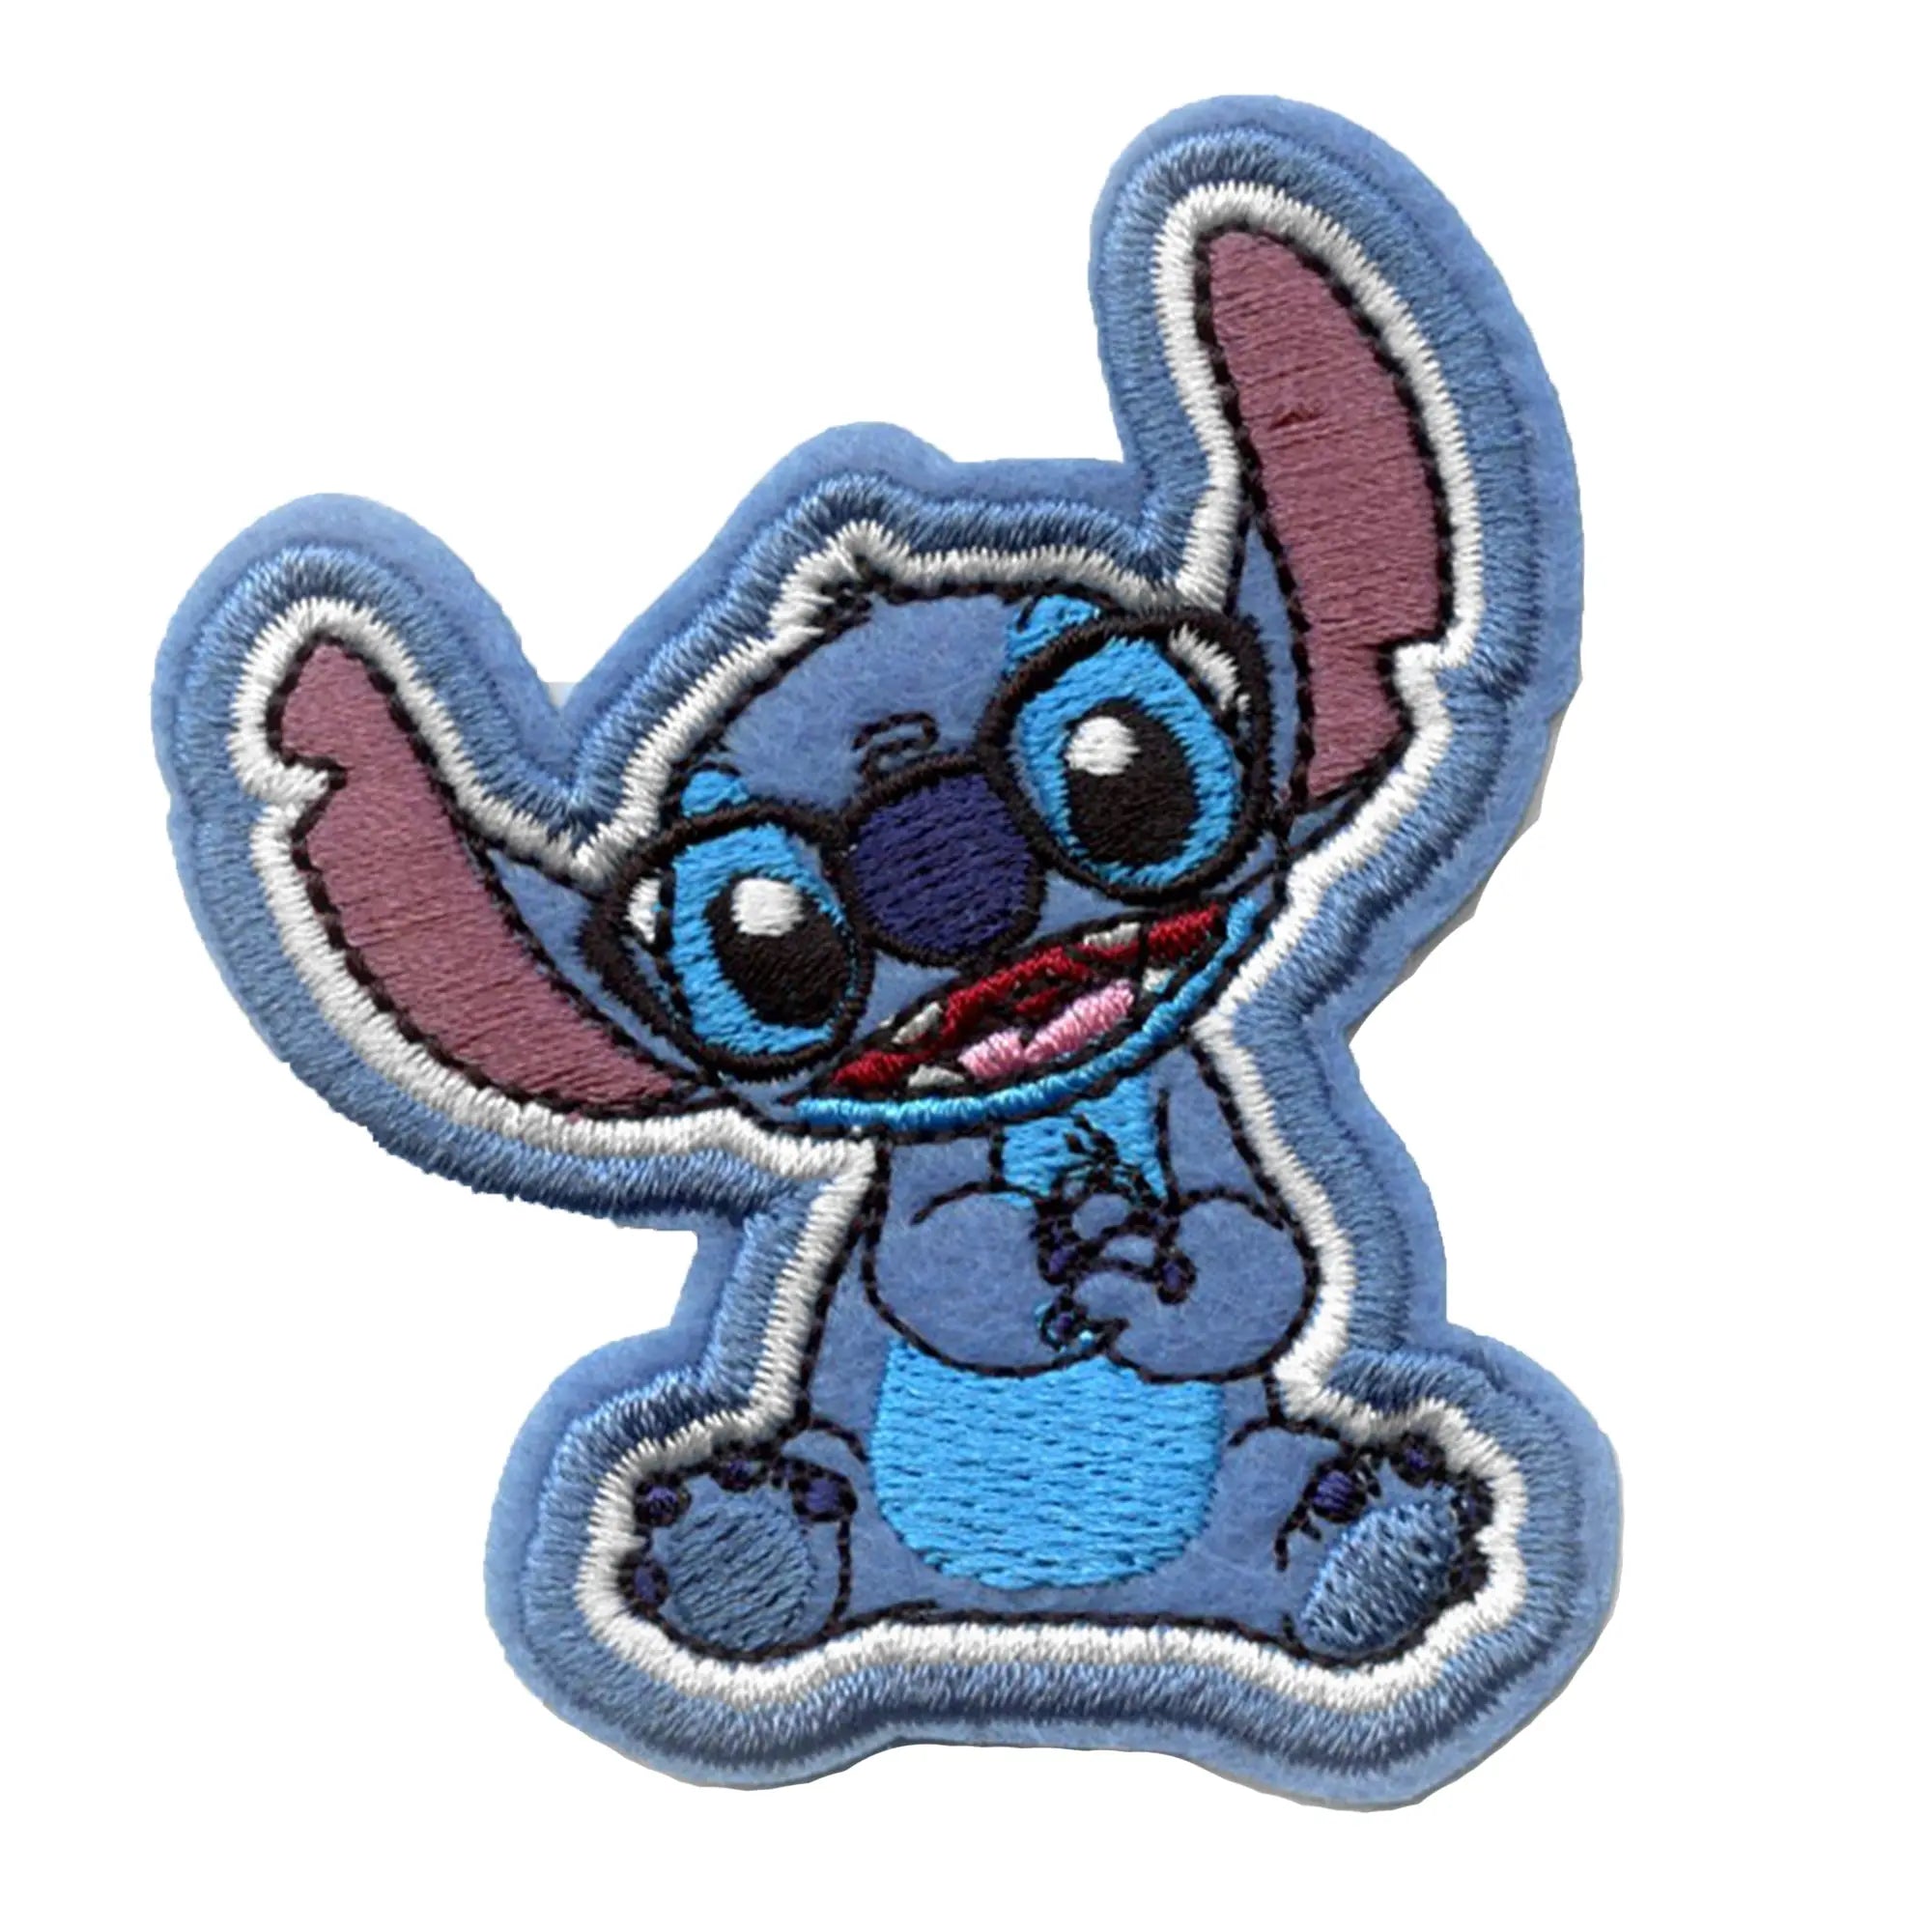 DISNEY'S LILO AND STITCH SUNGLASSES 2 1/2 EMBROIDERED PATCH SEWN/IRON ON